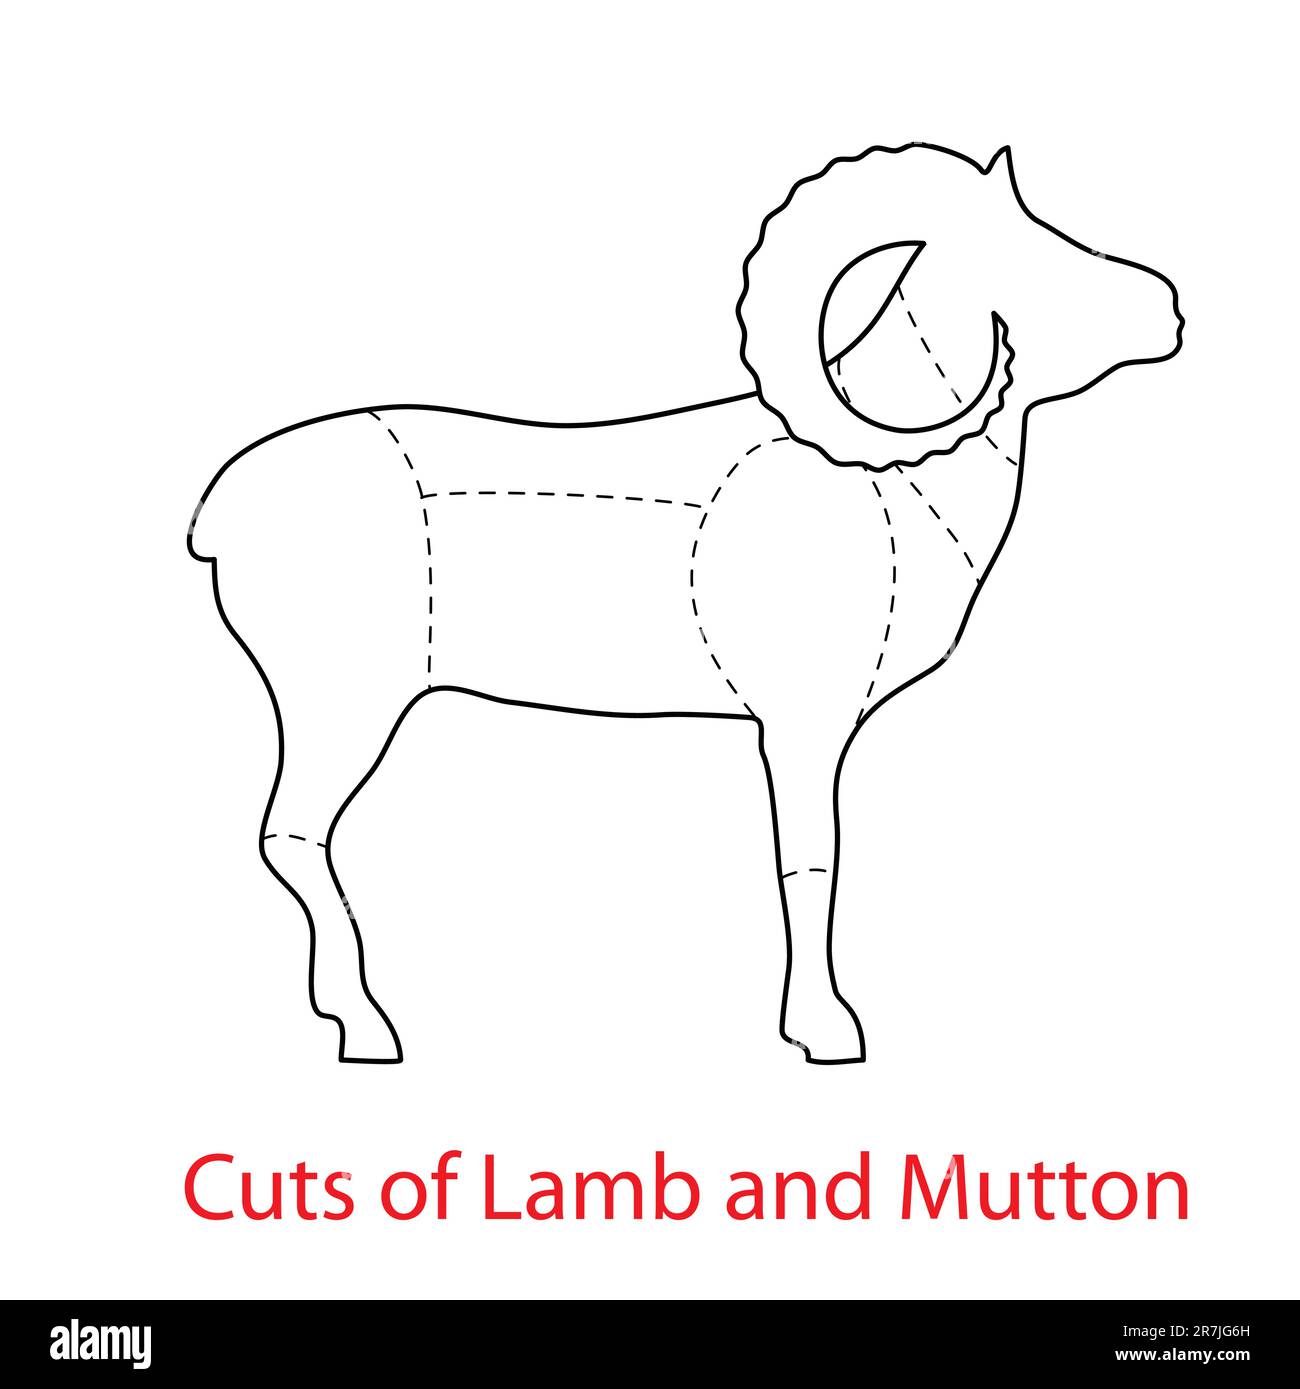 Cuts of Lamb and Mutton.Pattern diagram Stock Vector